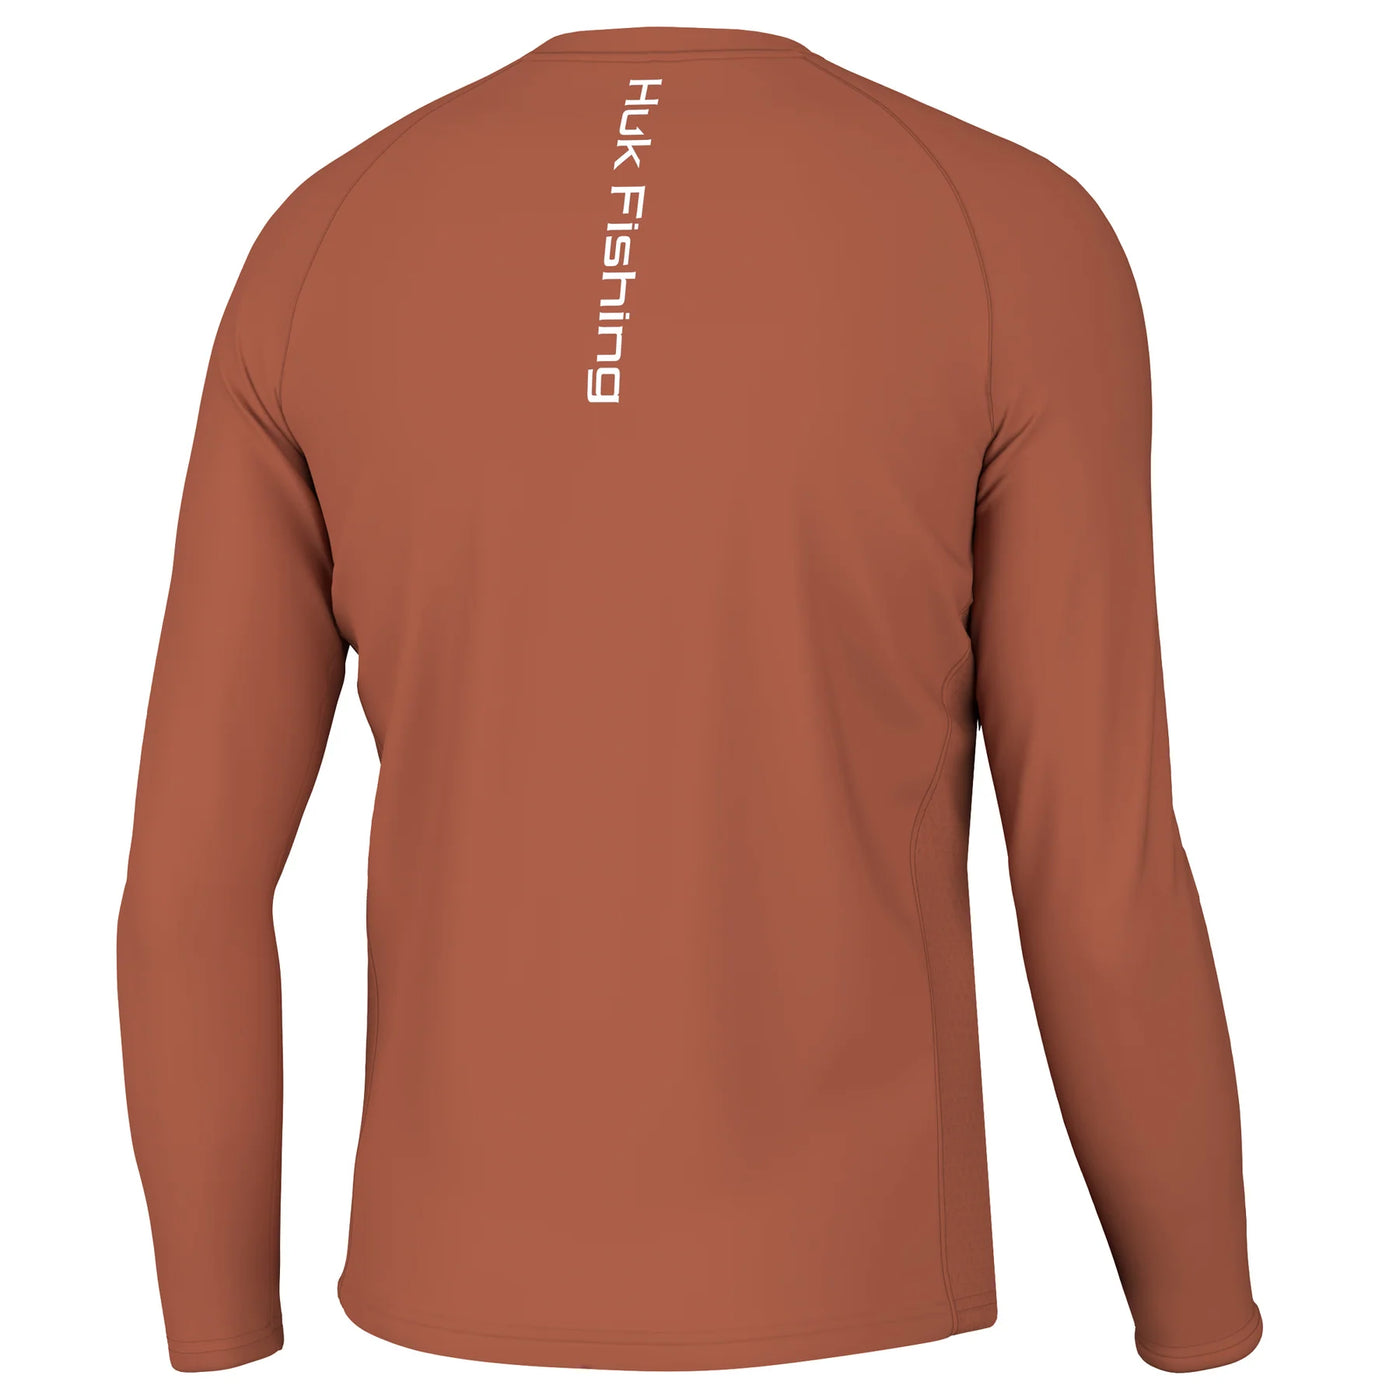 Huk Baked Clay Pursuit Performance Shirt